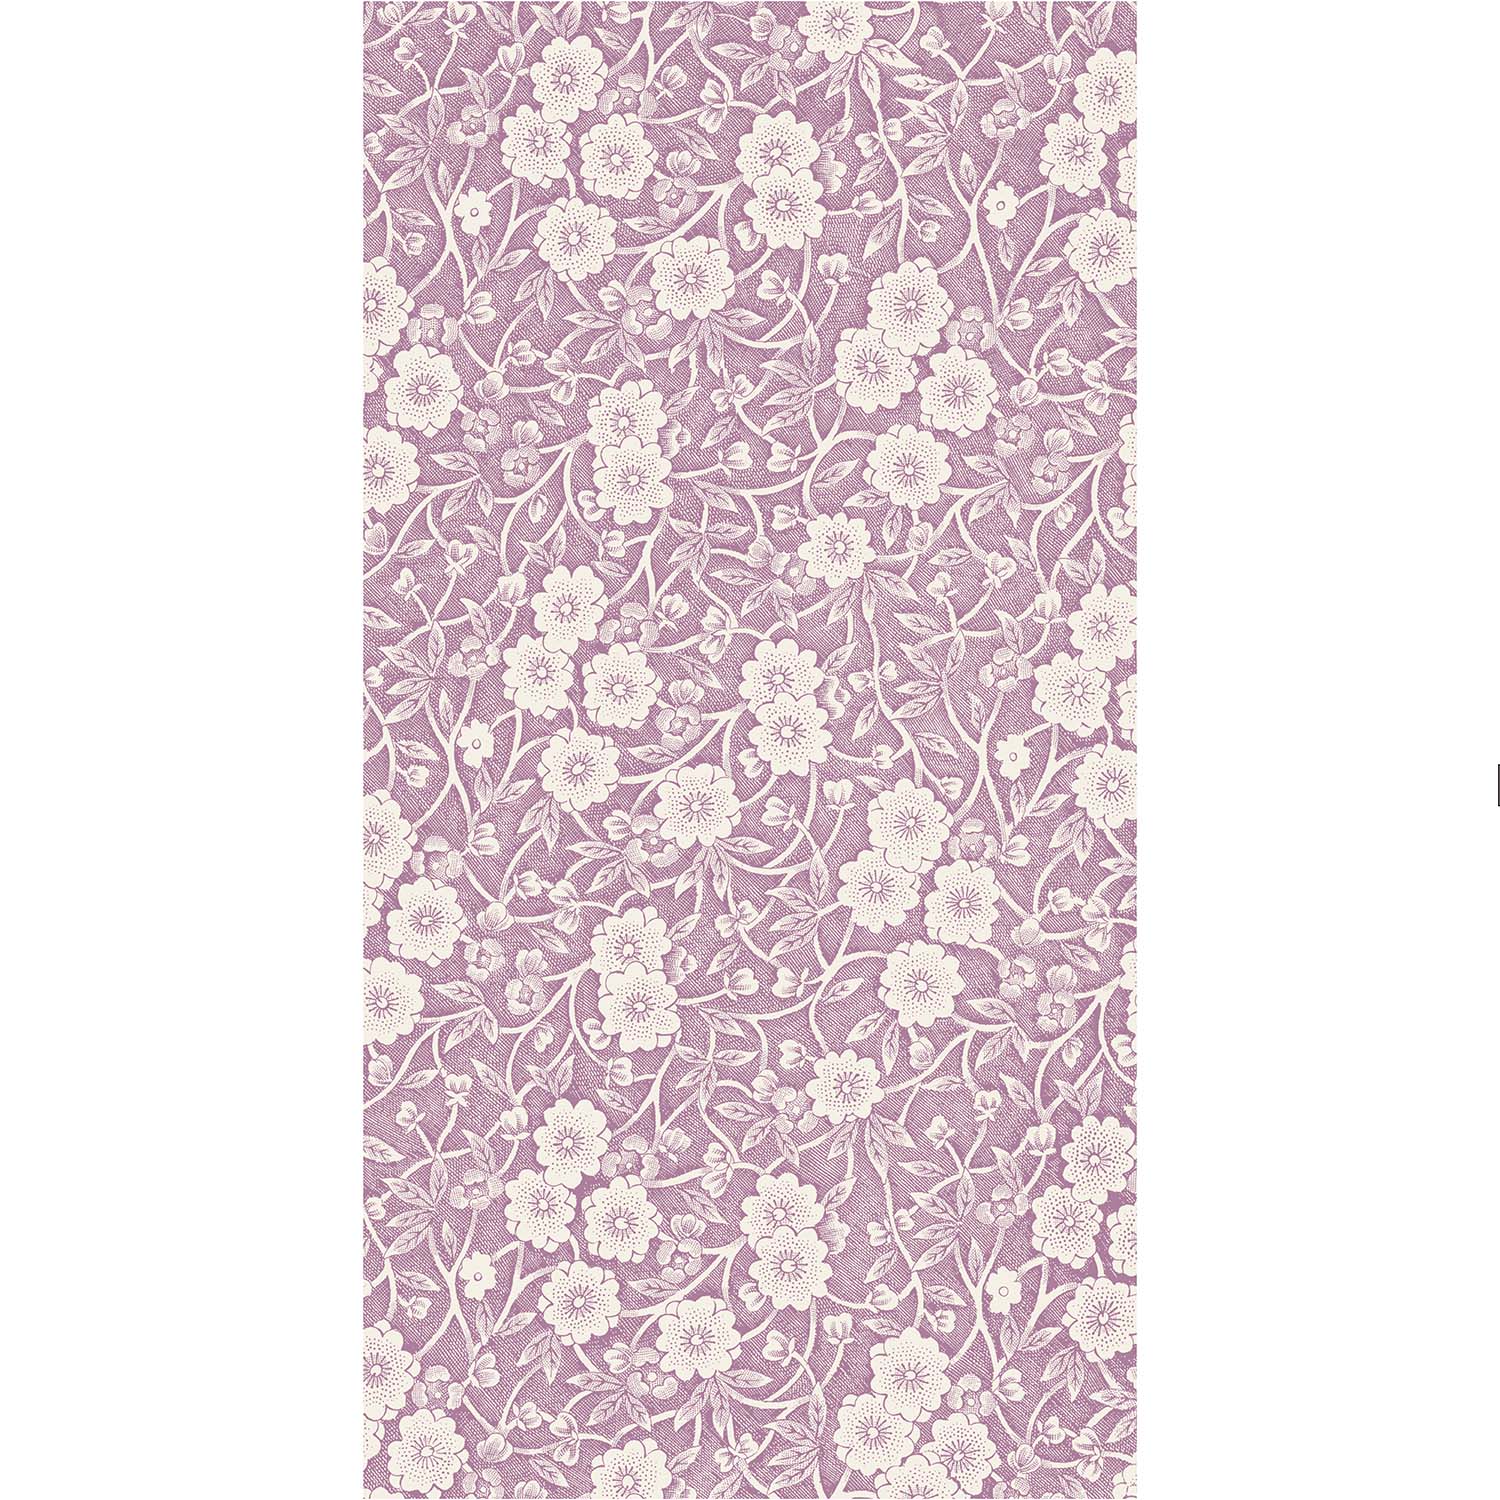 Beautiful Lilac Calico Napkins by Hester &amp; Cook, with a purple and white floral pattern on a white background.